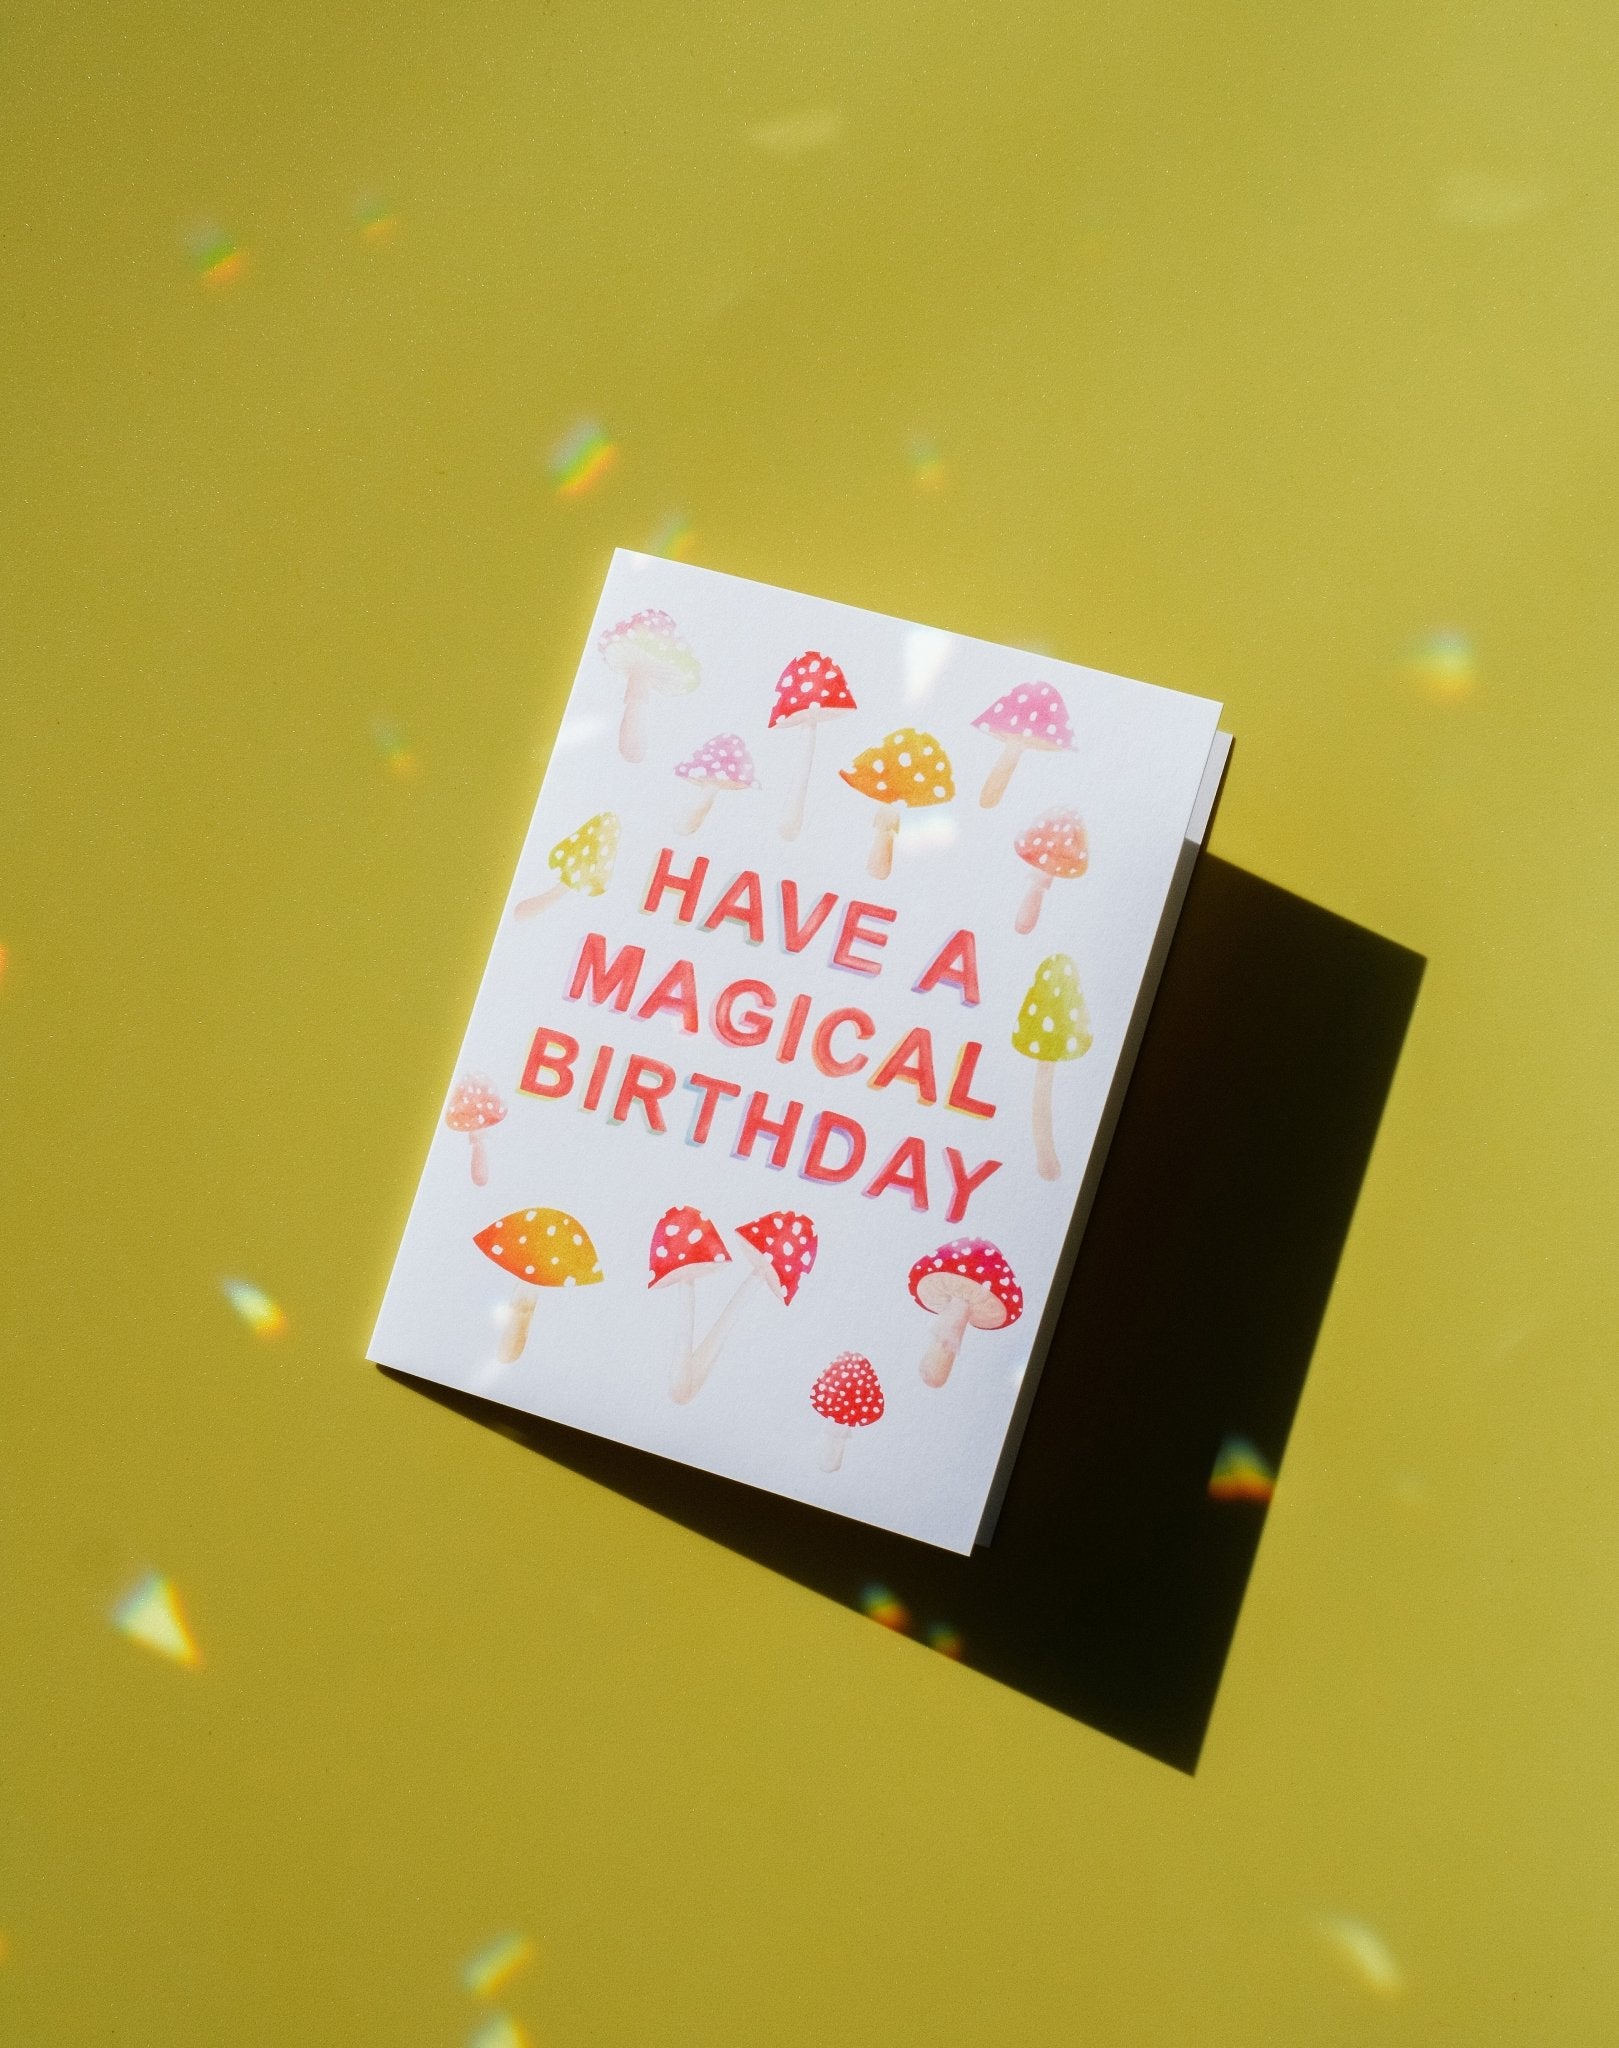 Cream colored card with pink, orange and red mushrooms and red printed text with the words &quot;Have A Magical Birthday&quot; in the middle. Shown on green background.